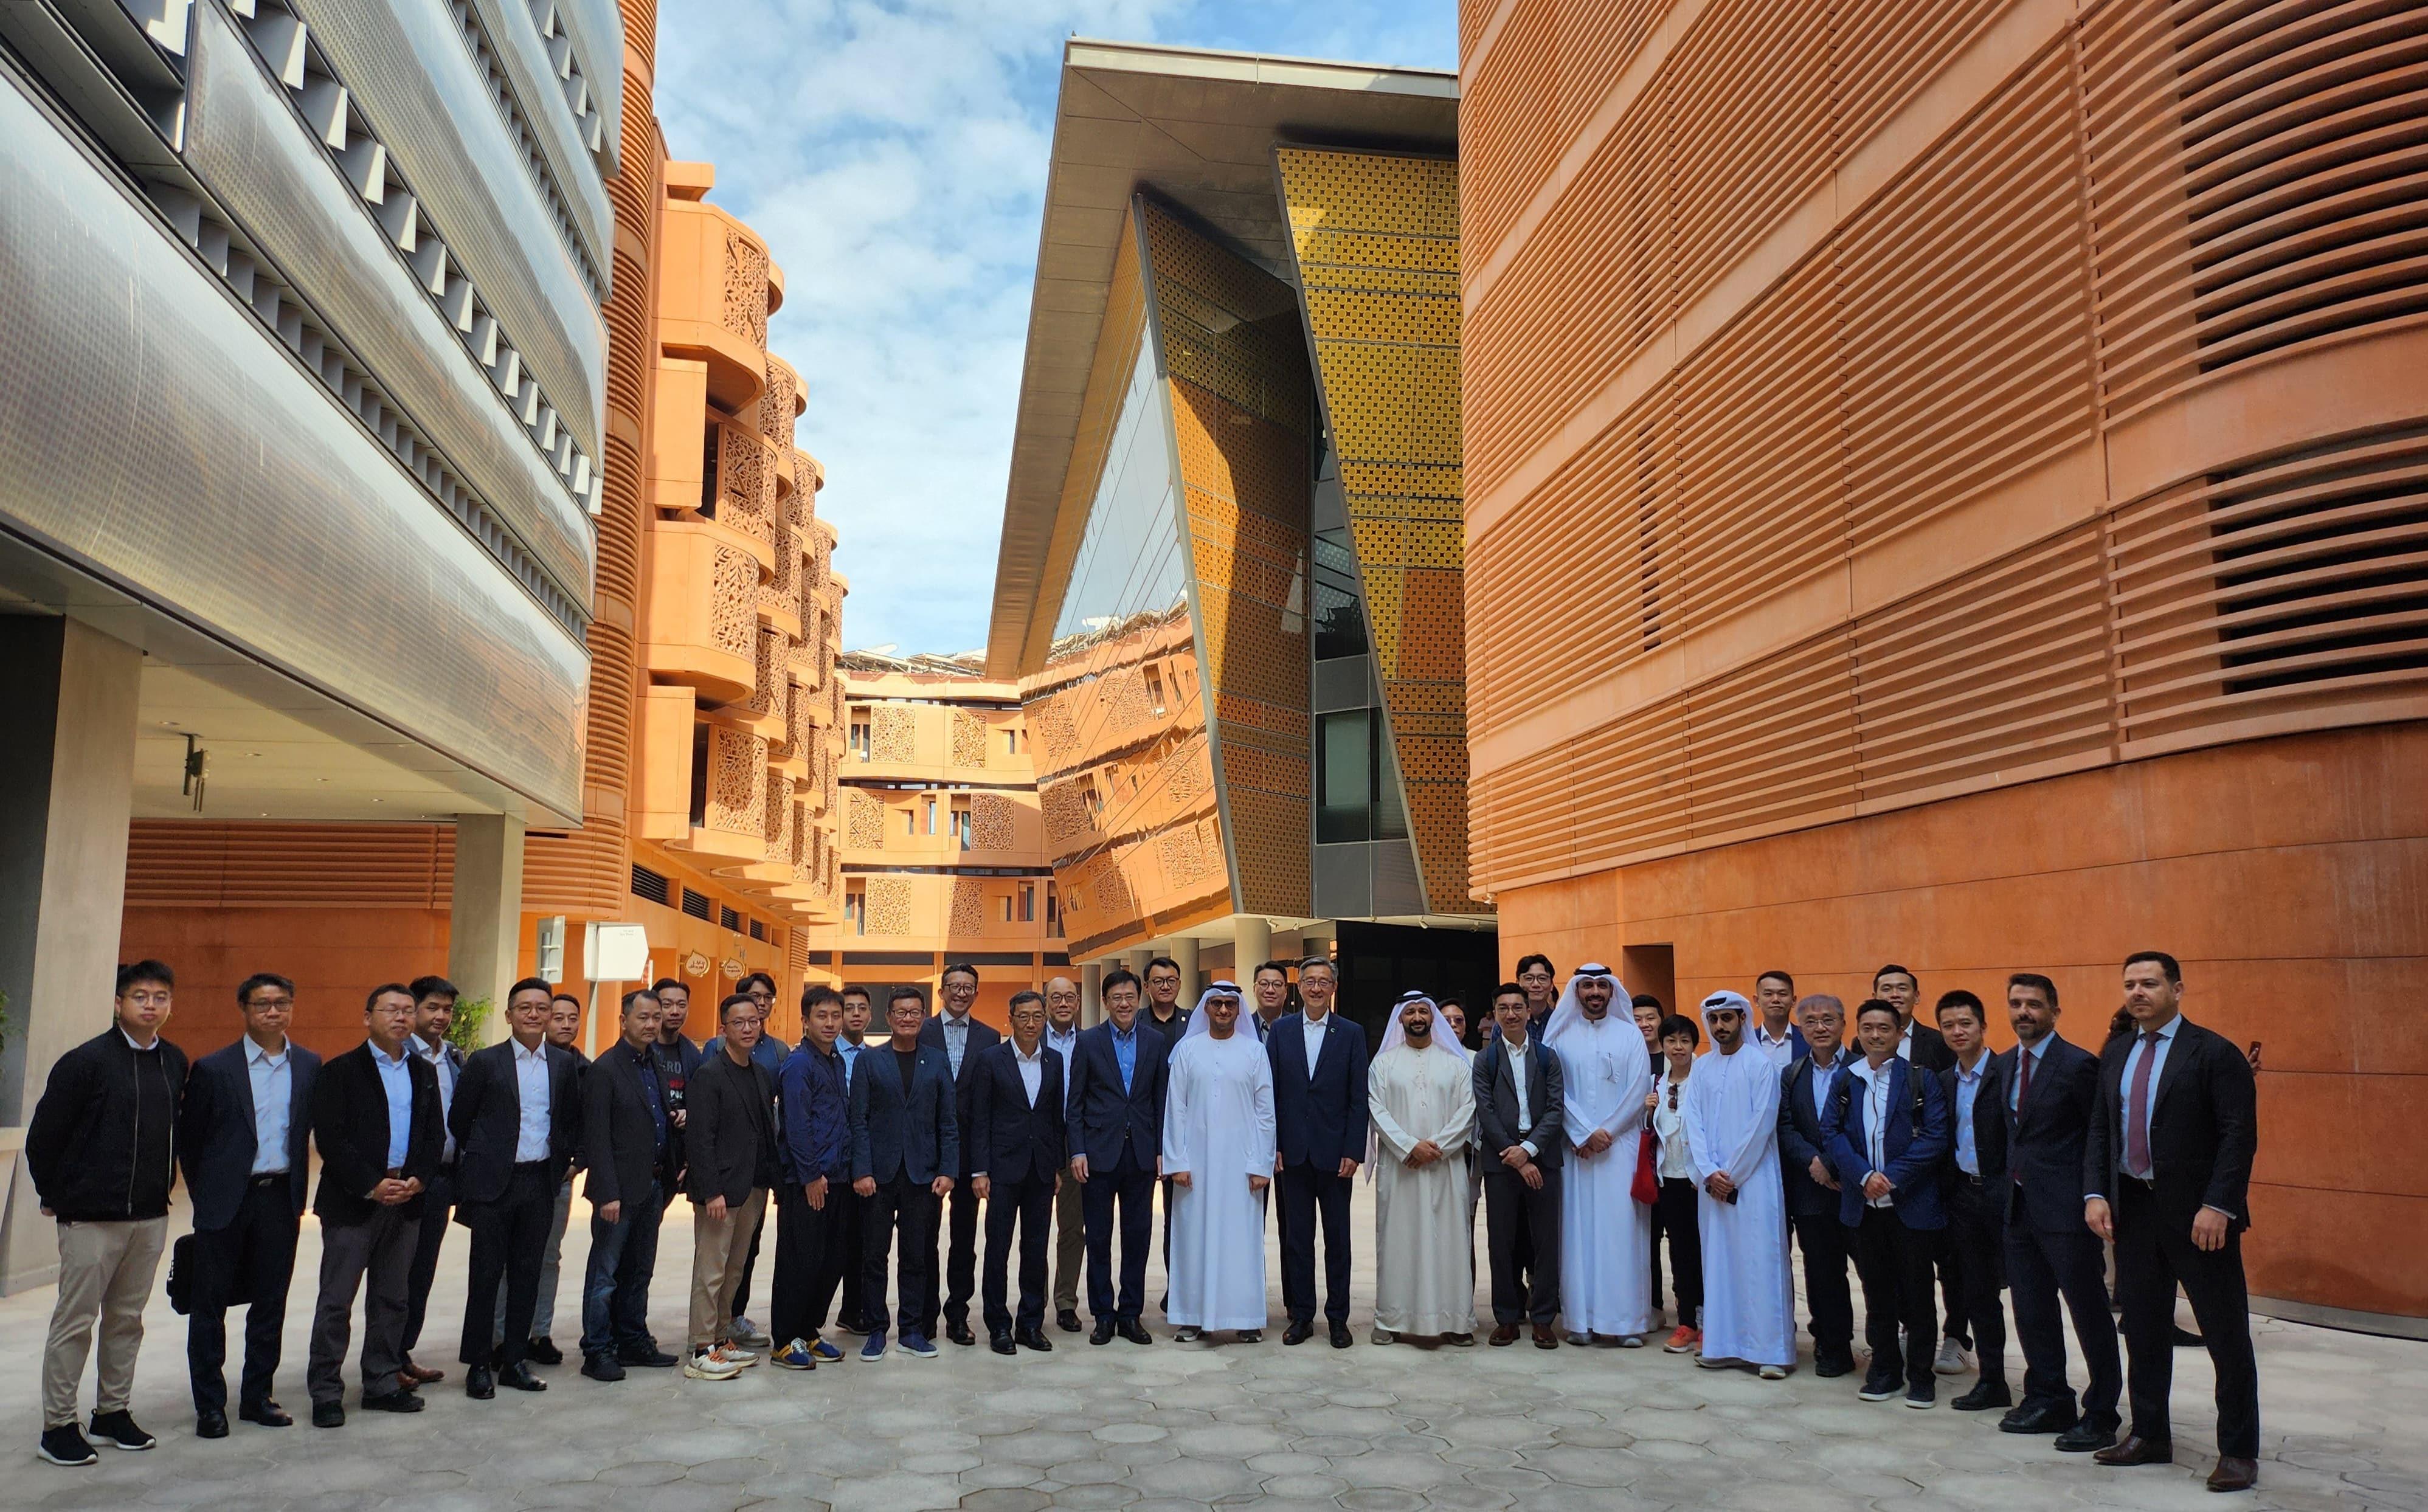 A delegation of representatives from the innovation and technology industry led by the Secretary for Innovation, Technology and Industry, Professor Sun Dong, took a group photo after visiting the Masdar City on March 7 (Abu Dhabi time).